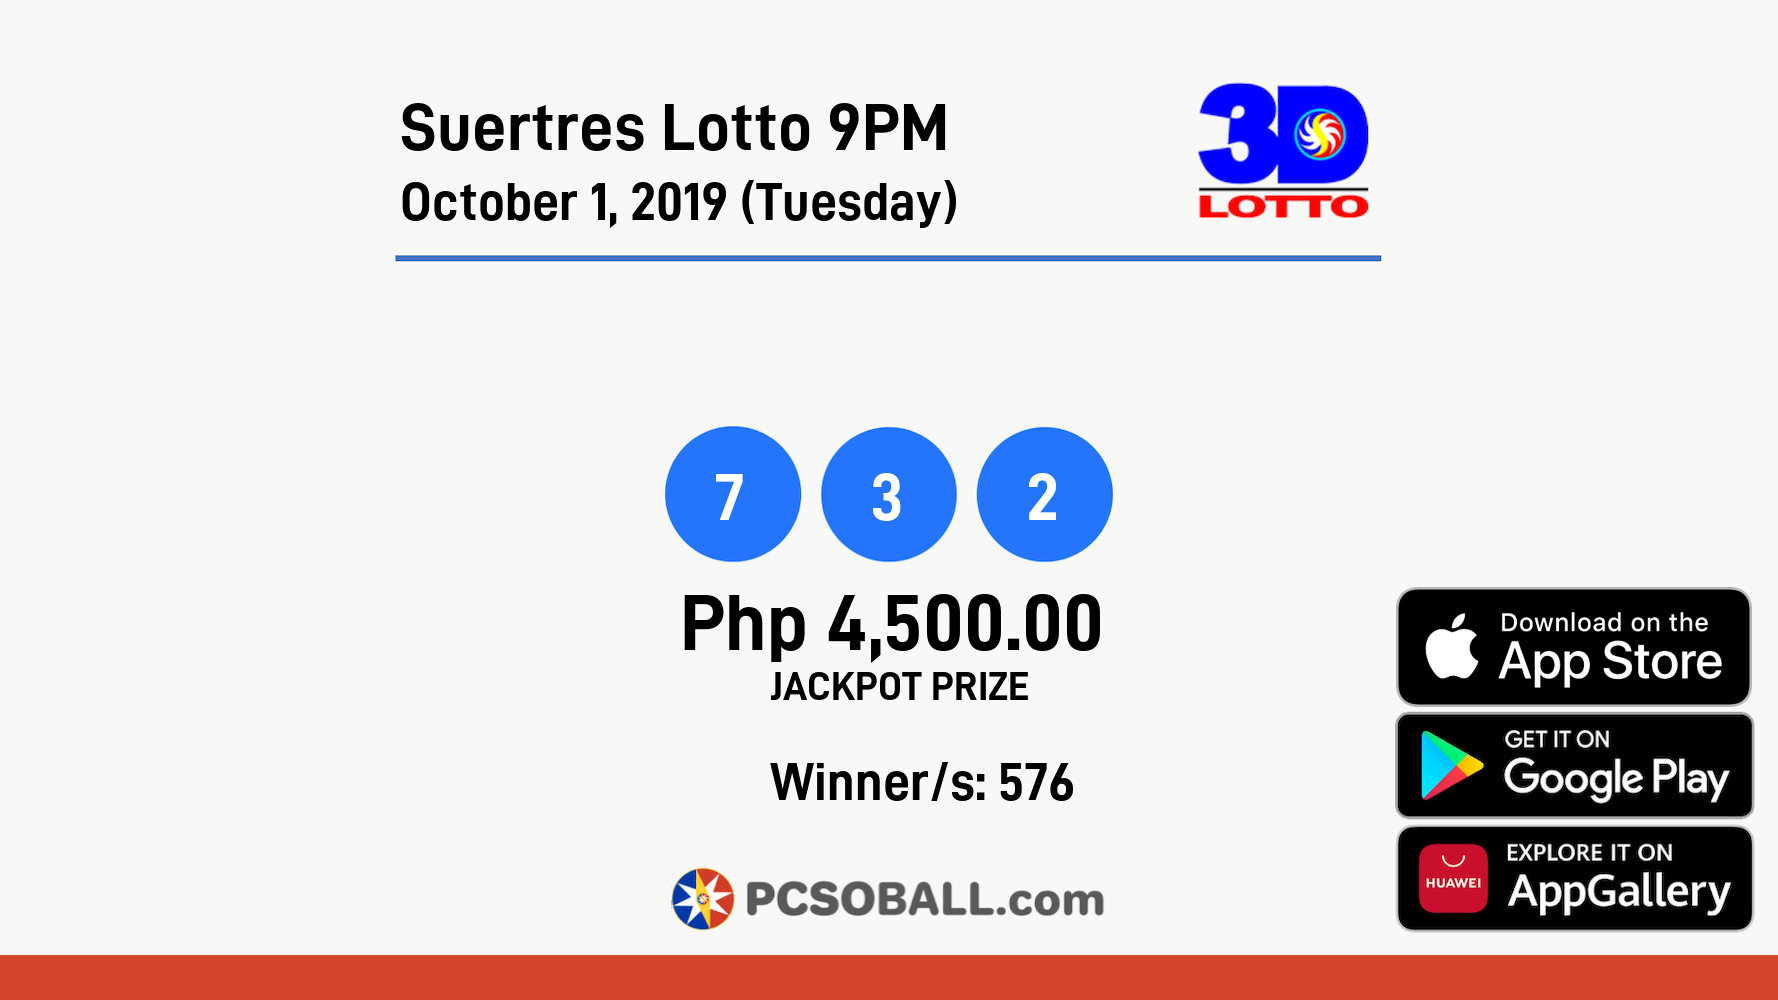 Suertres Lotto 9PM October 1, 2019 (Tuesday) Result